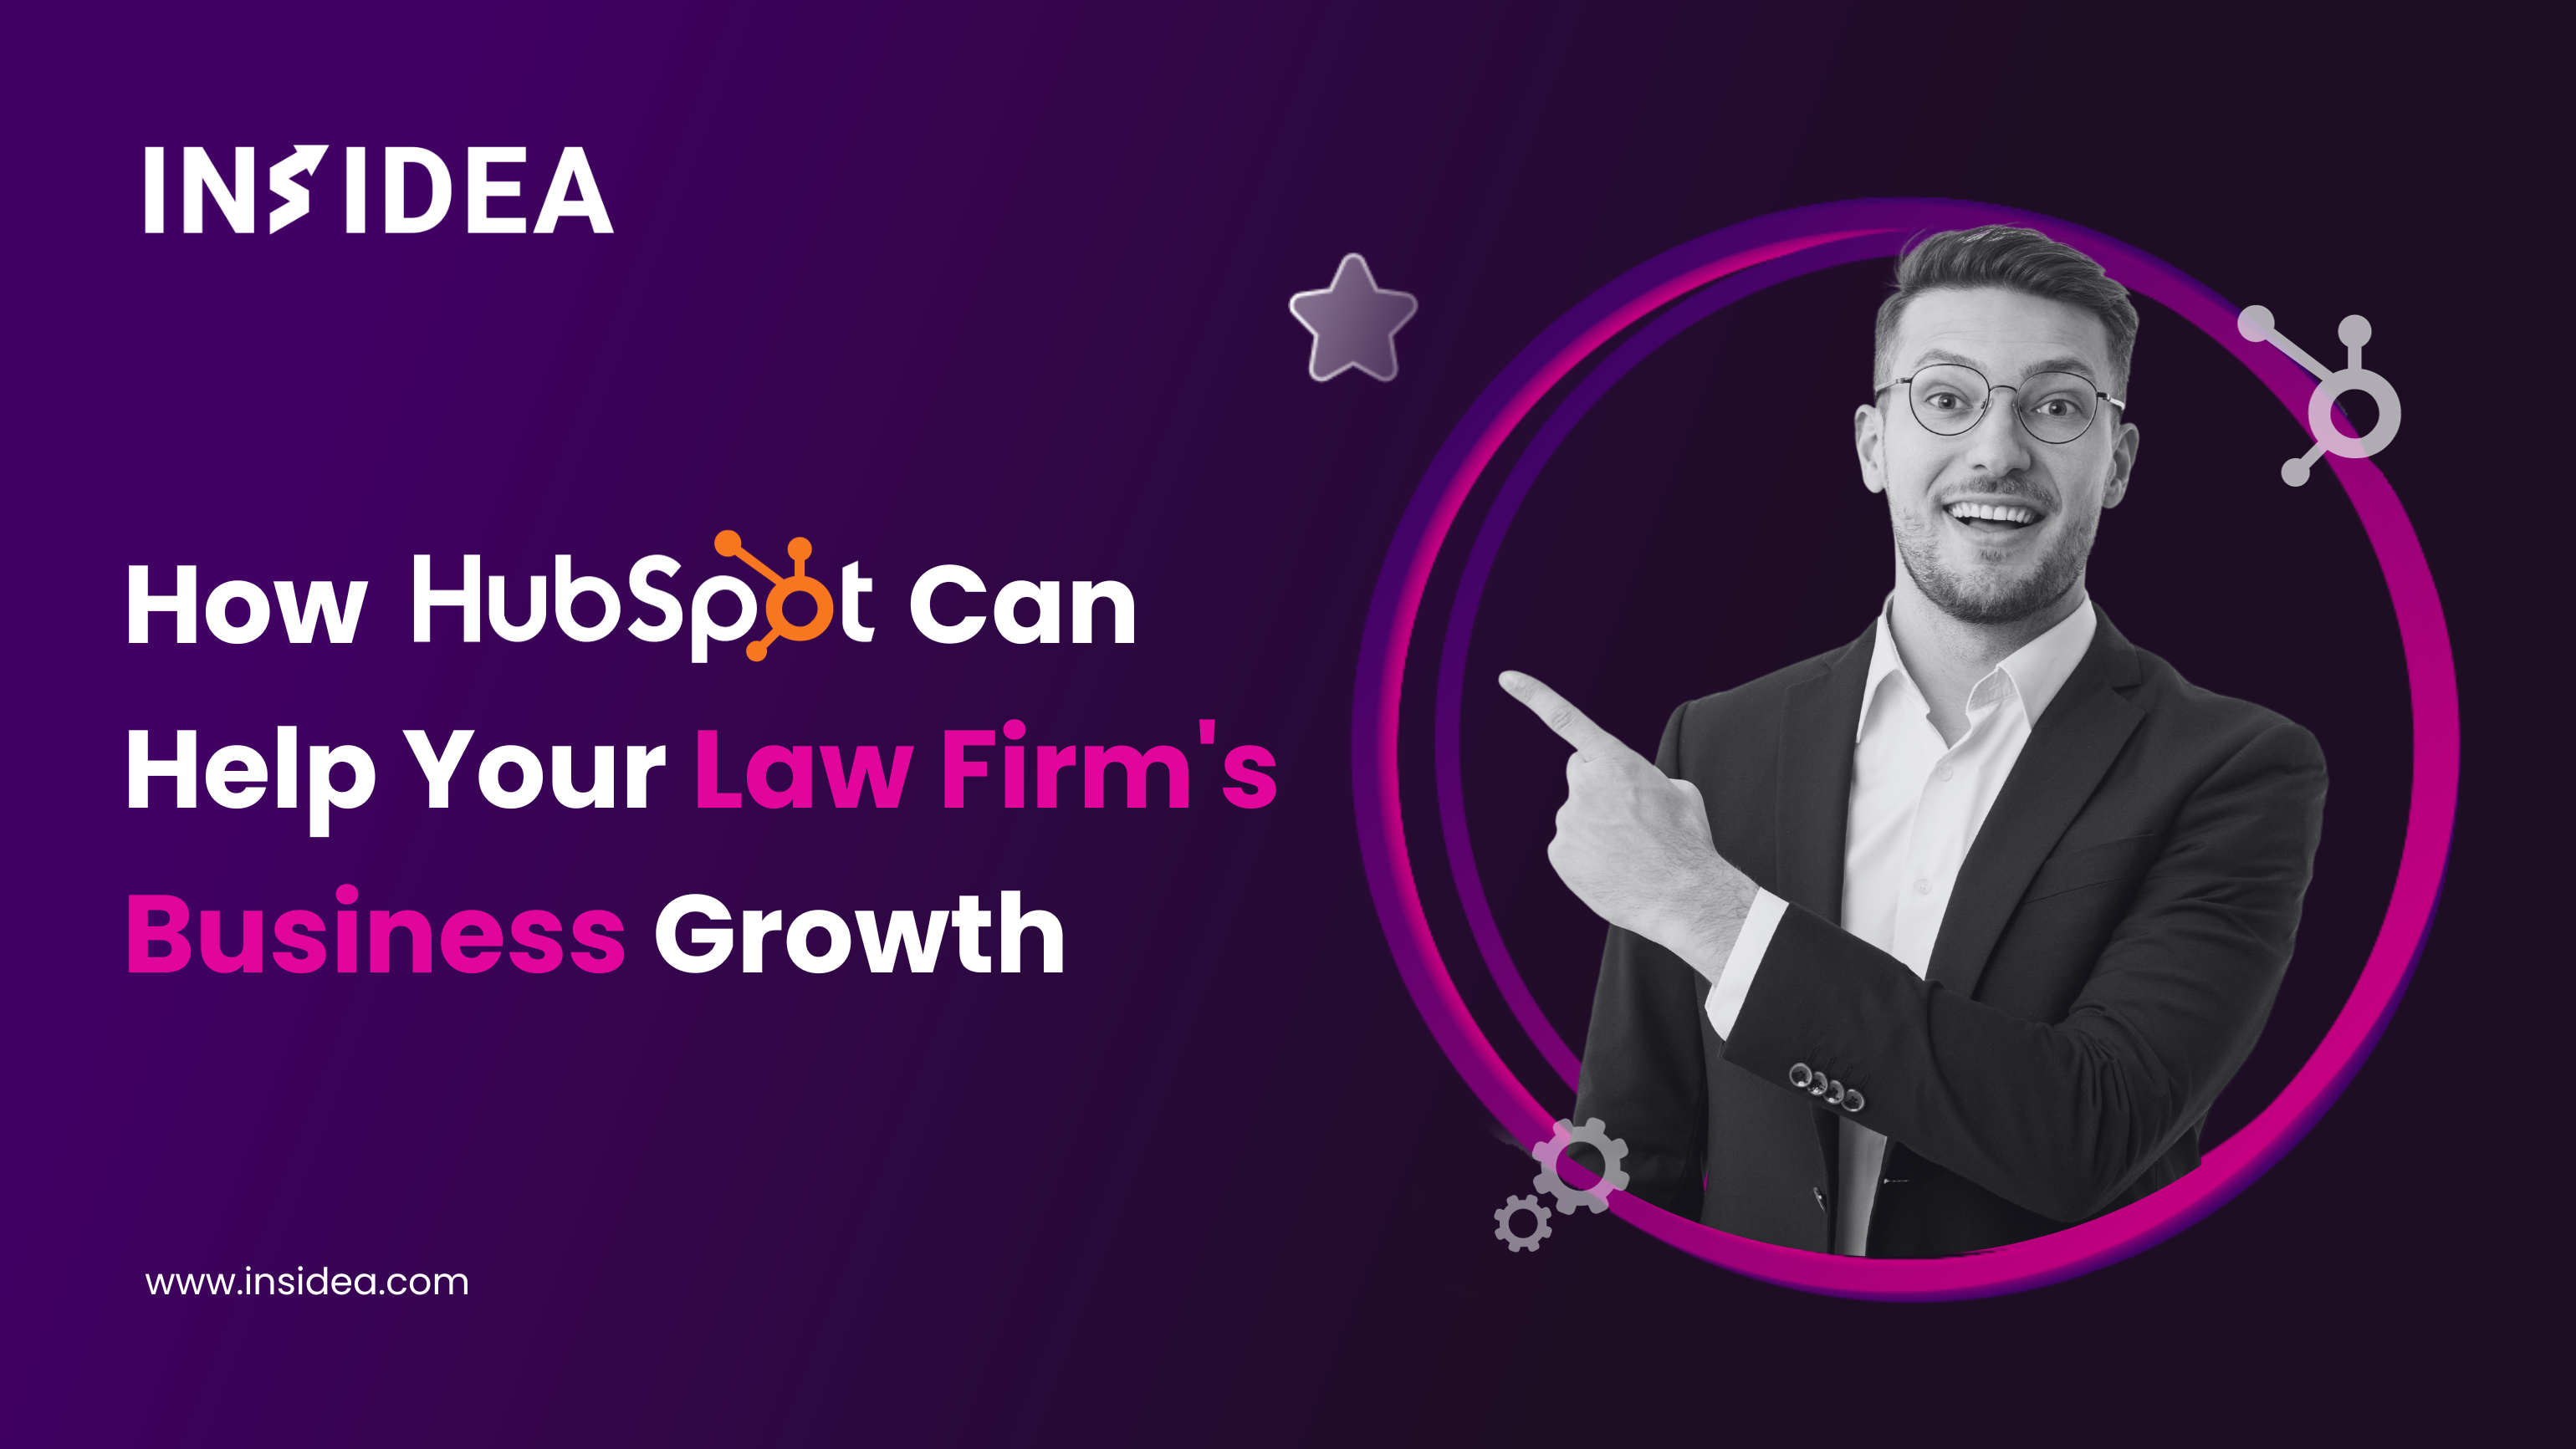 How HubSpot Can Help Your Law Firm's Business Growth